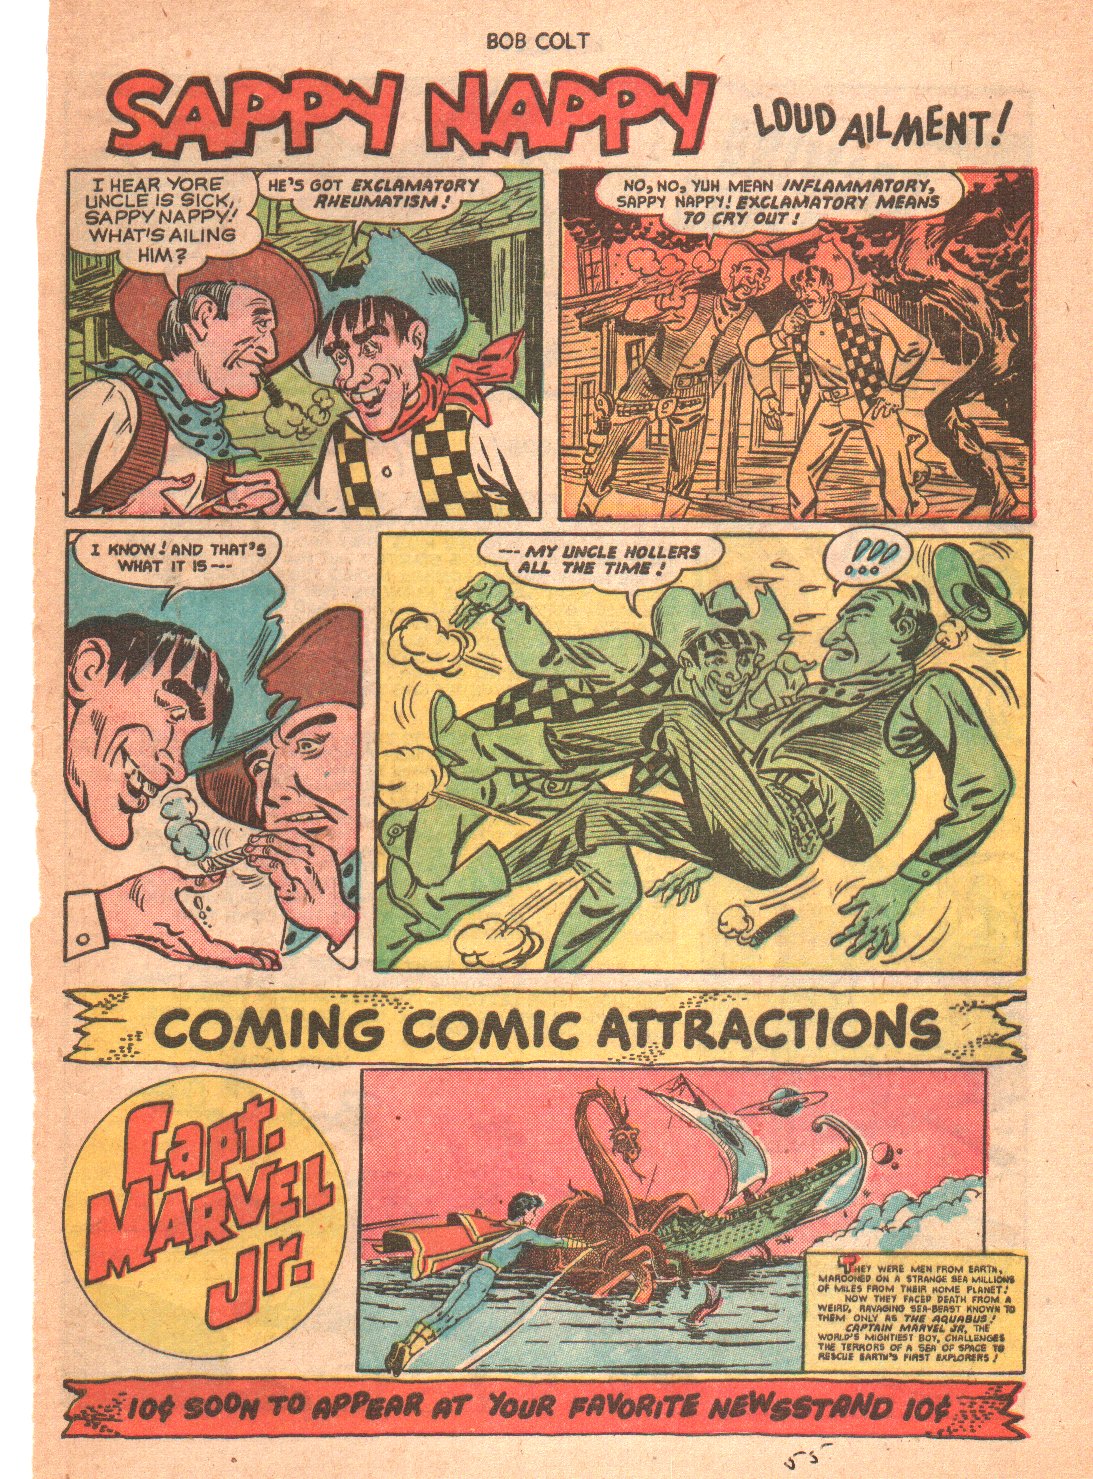 Read online Bob Colt Western comic -  Issue #6 - 22